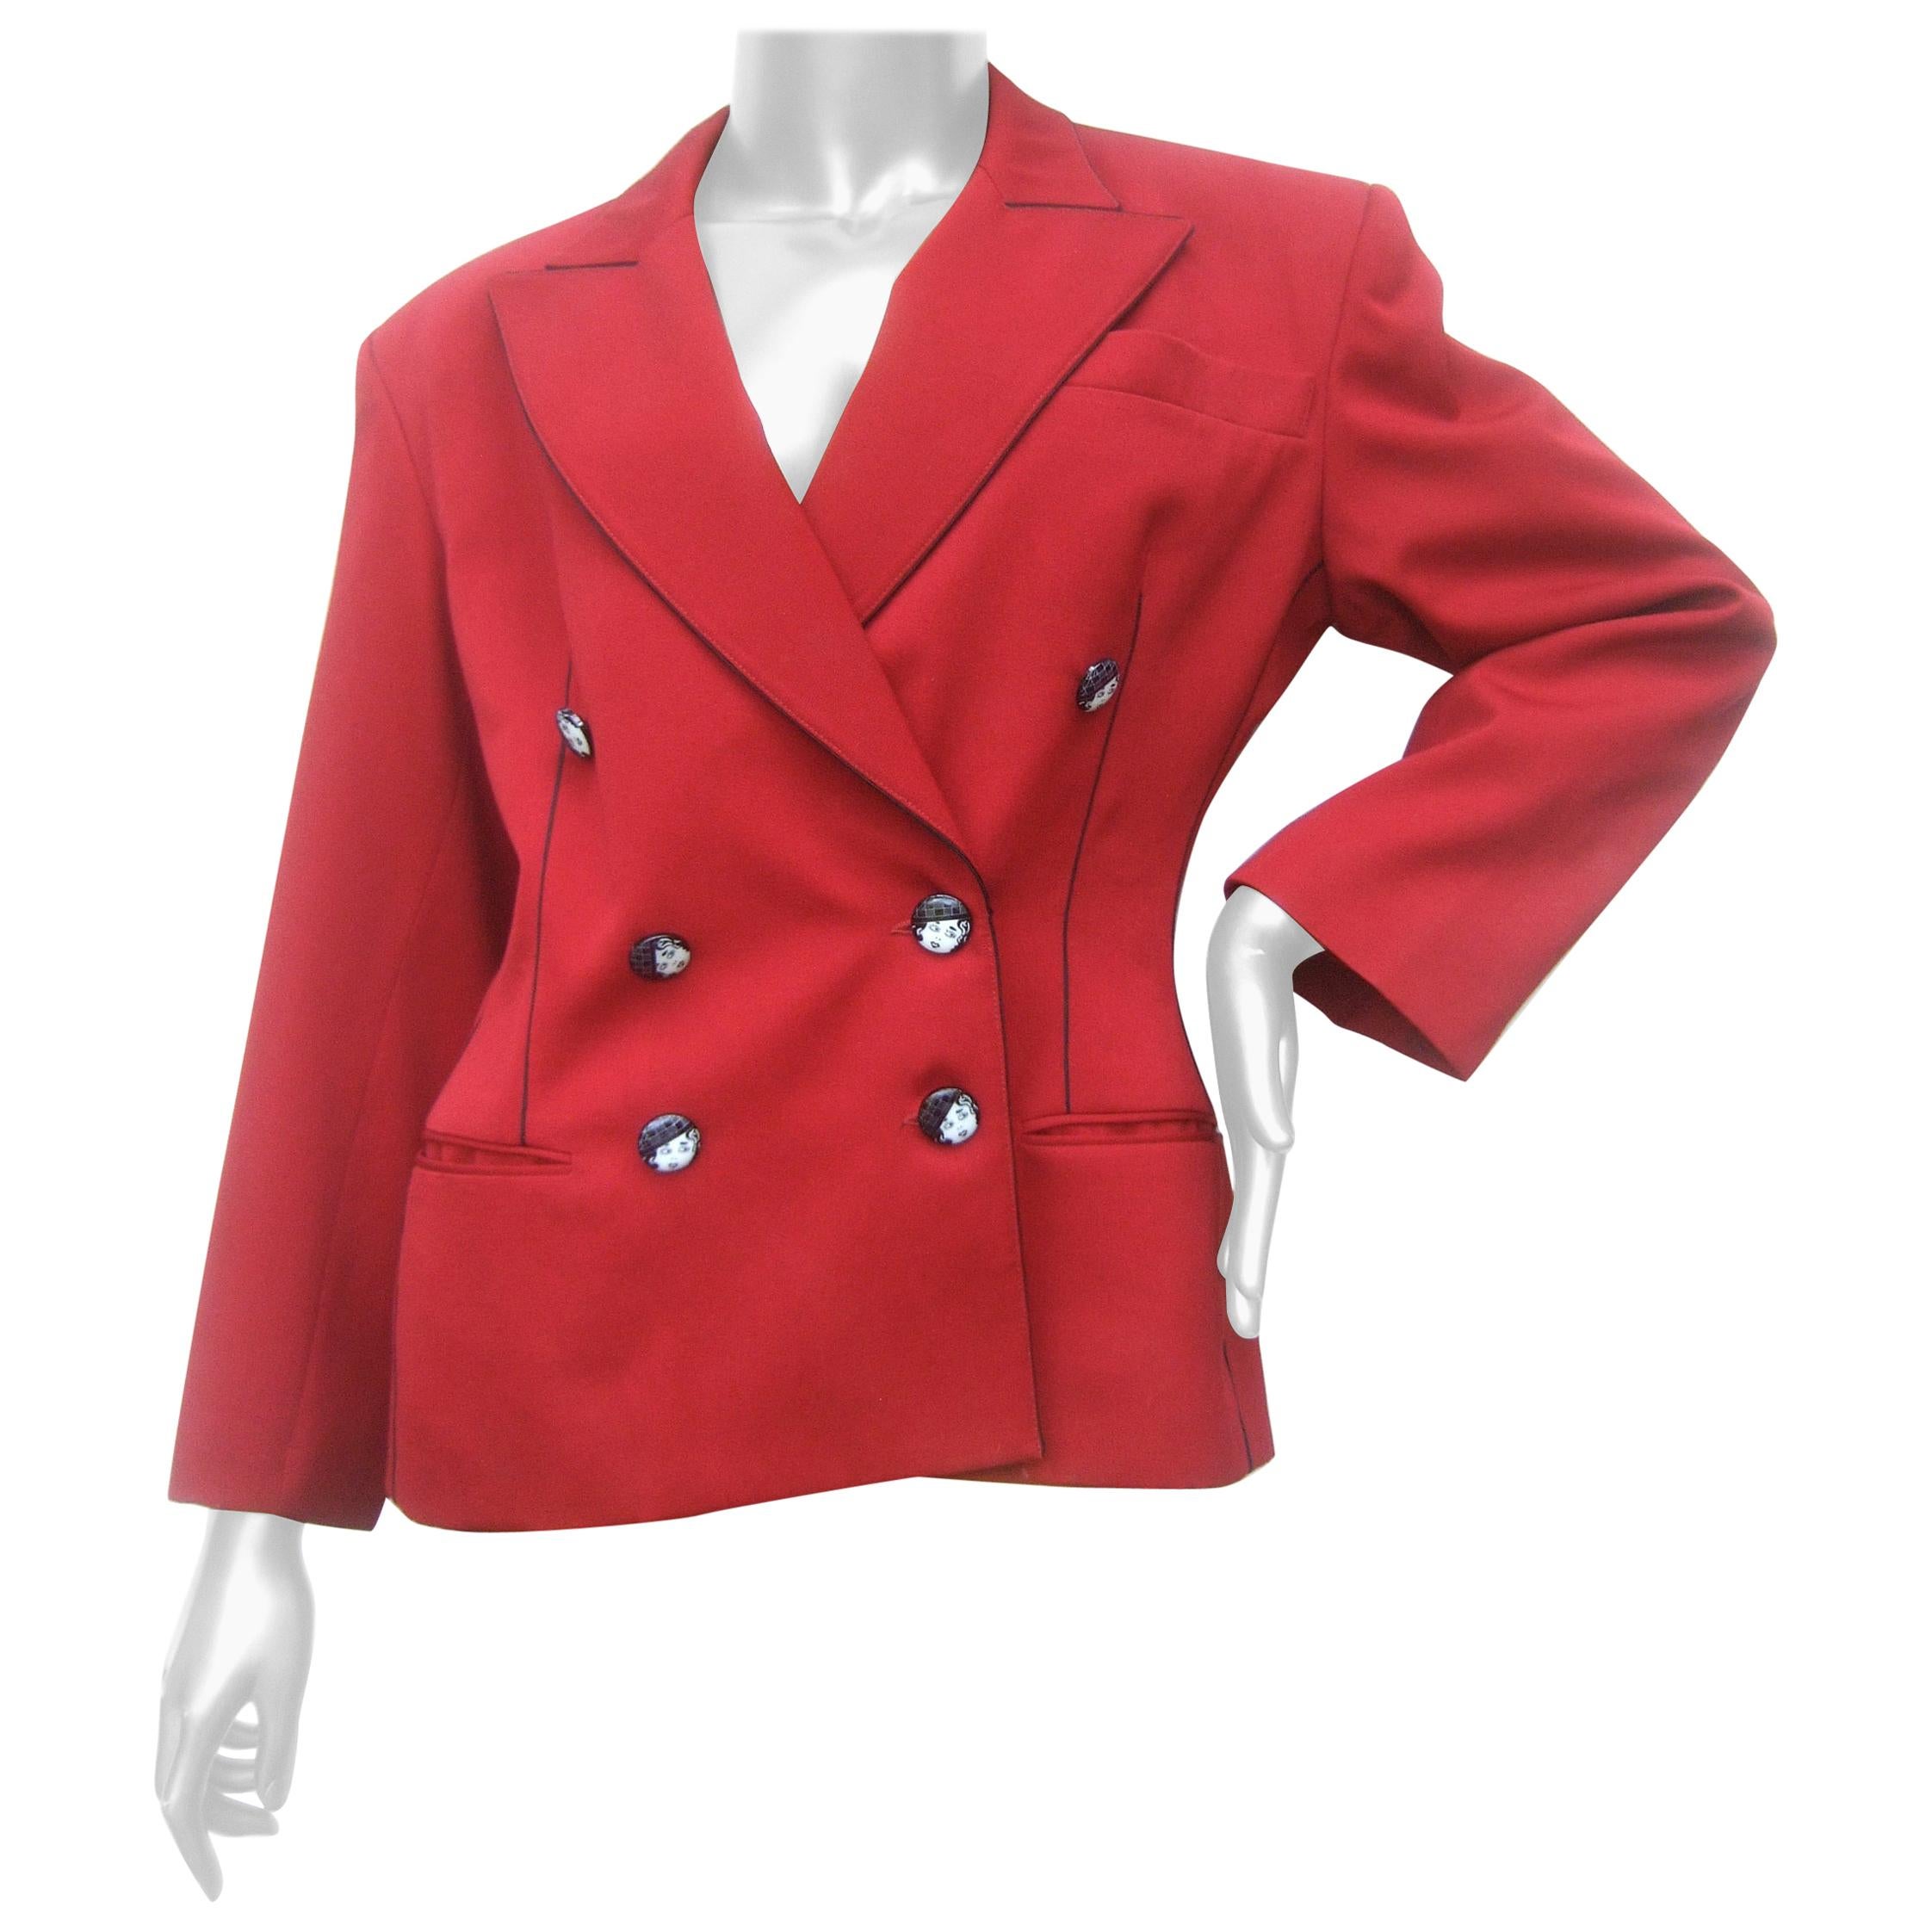 Lolita Lempicka Paris Red Wool Face Button Double-Breasted Blazer c 1980s